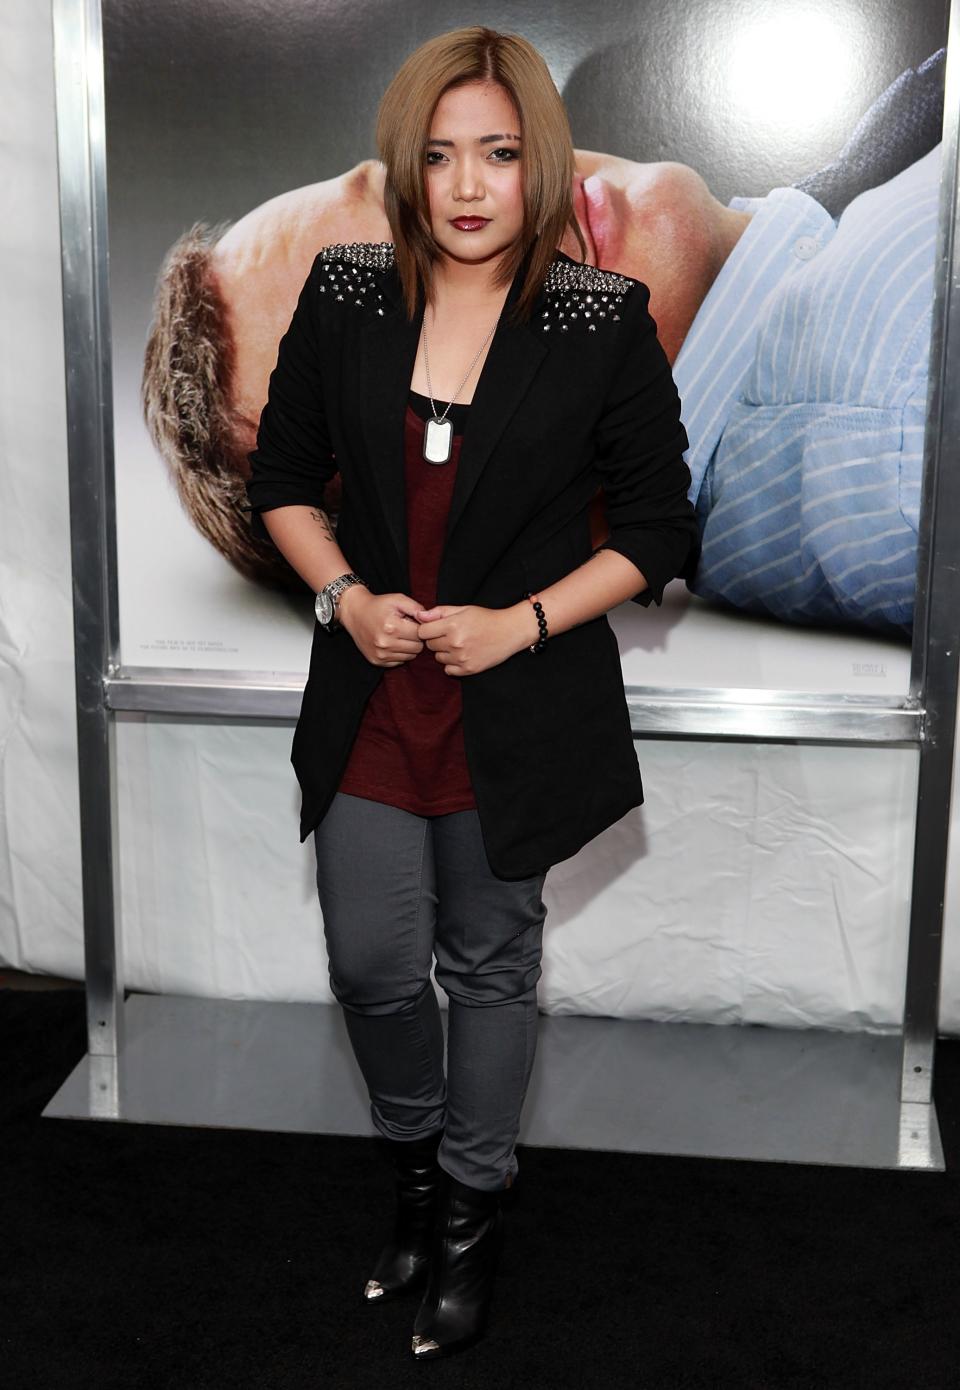 NEW YORK, NY - OCTOBER 09: Charice Pempengco attends the "Here Comes The Boom" premiere at AMC Loews Lincoln Square on October 9, 2012 in New York City. (Photo by Robin Marchant/Getty Images)